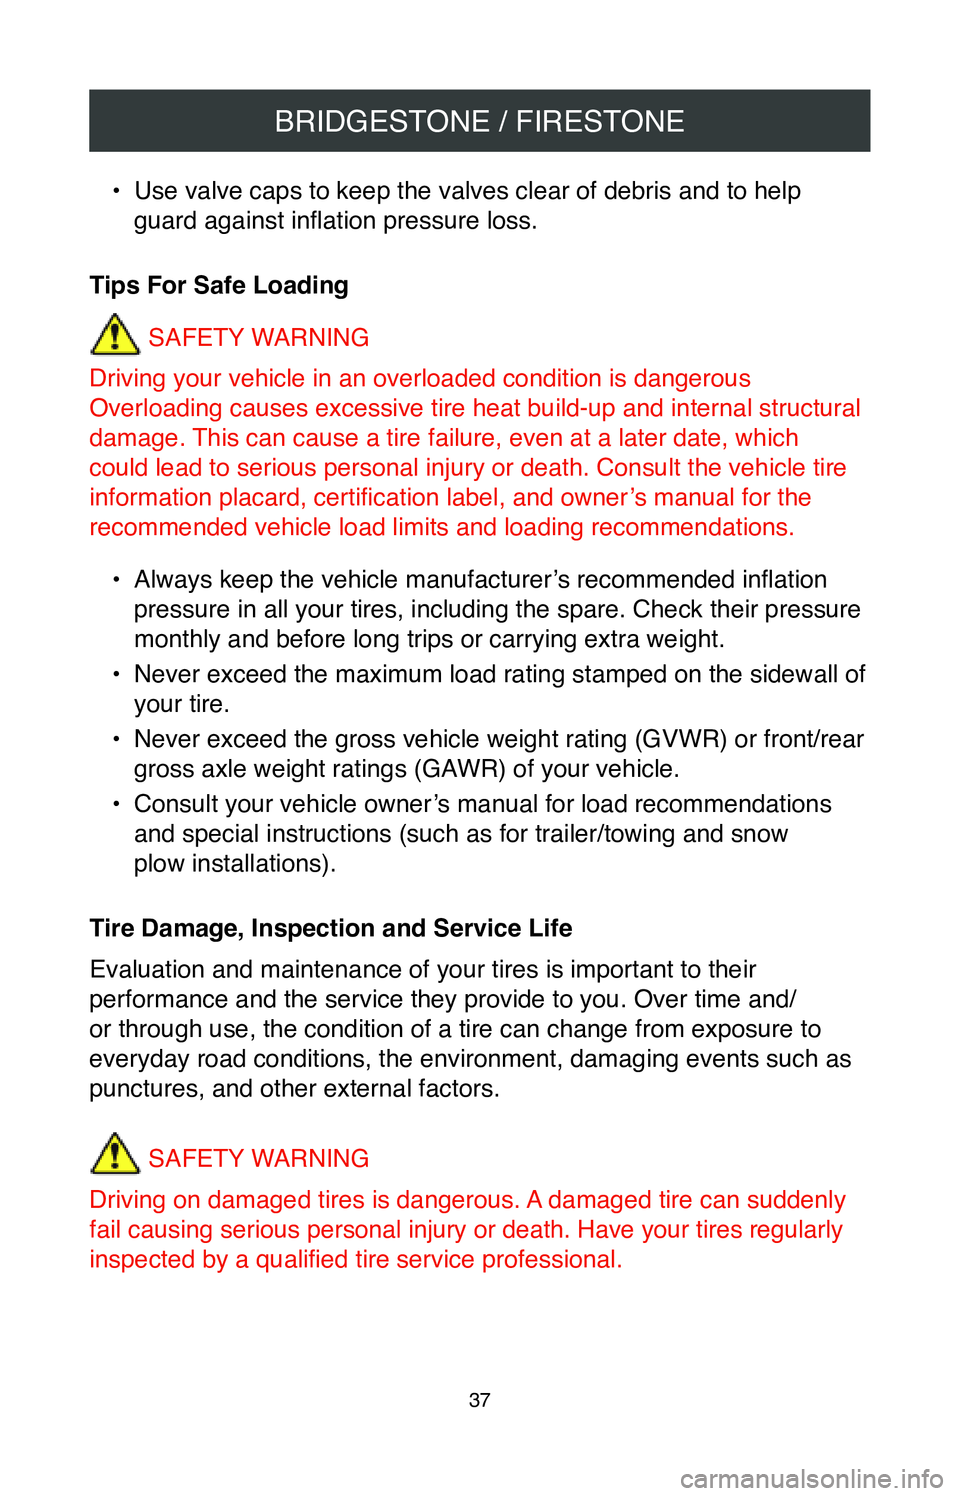 TOYOTA C-HR 2020  Warranties & Maintenance Guides (in English) BRIDGESTONE / FIRESTONE
37
• Use valve caps to keep the valves clear of debris and to help 
guard against inflation pressure loss.
Tips For Safe Loading SAFETY WARNING
Driving your vehicle in an ove